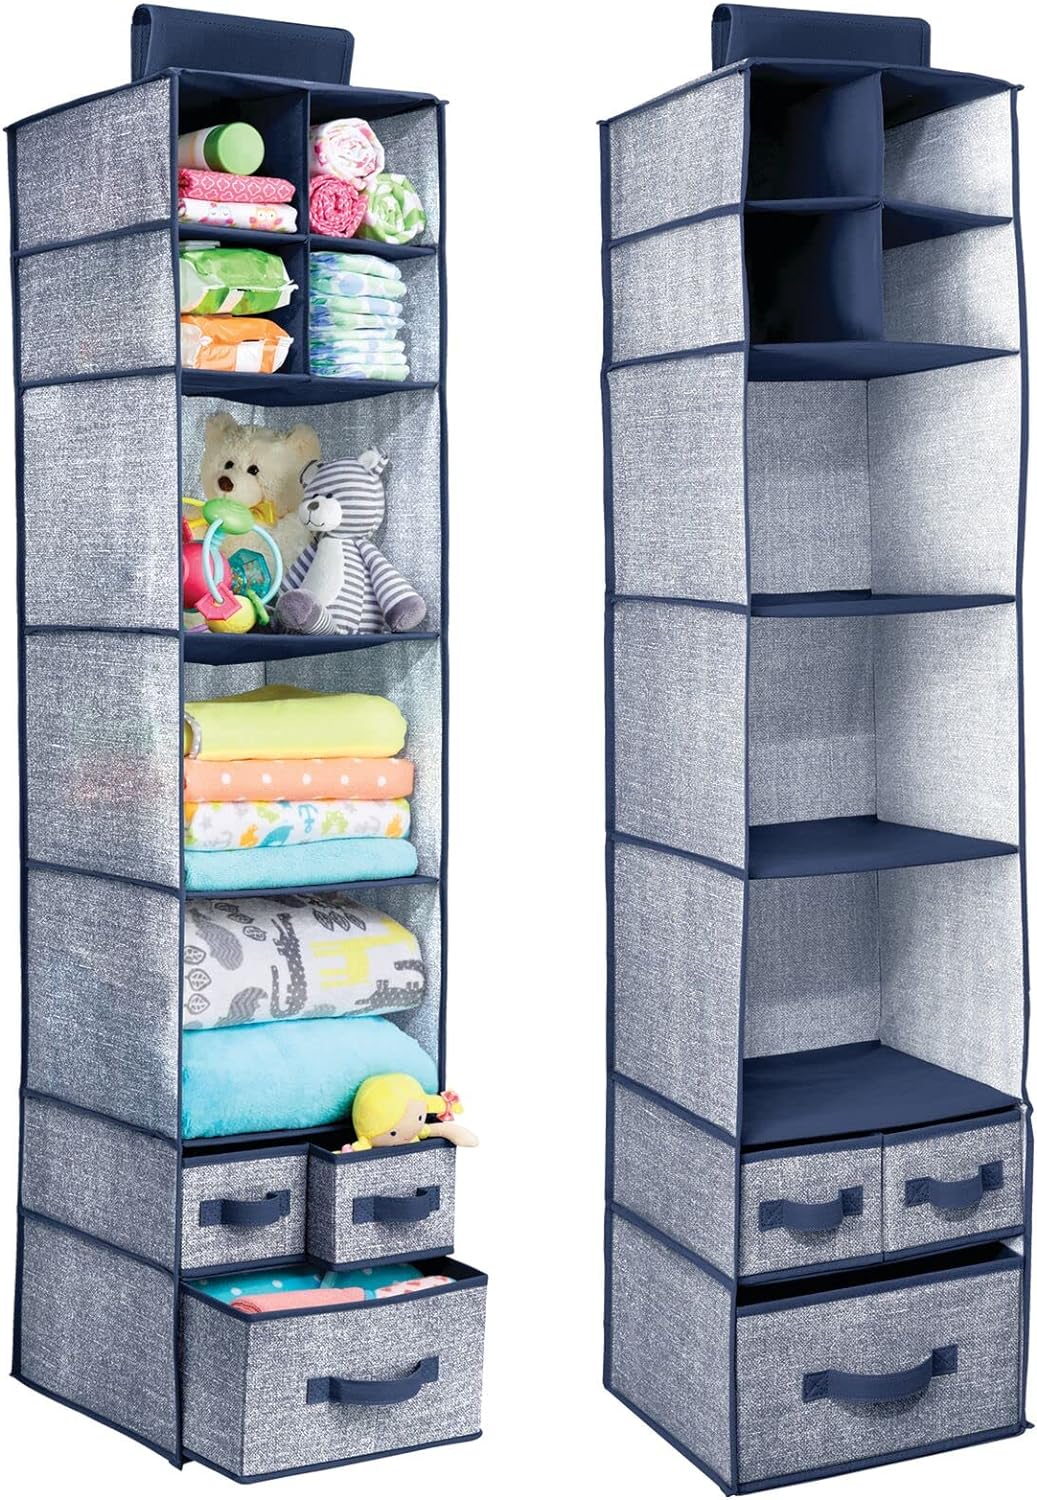 Blushbees Soft Fabric over Closet Rod Hanging Storage Organizer with 7 Shelves and 3 Removable Drawers.